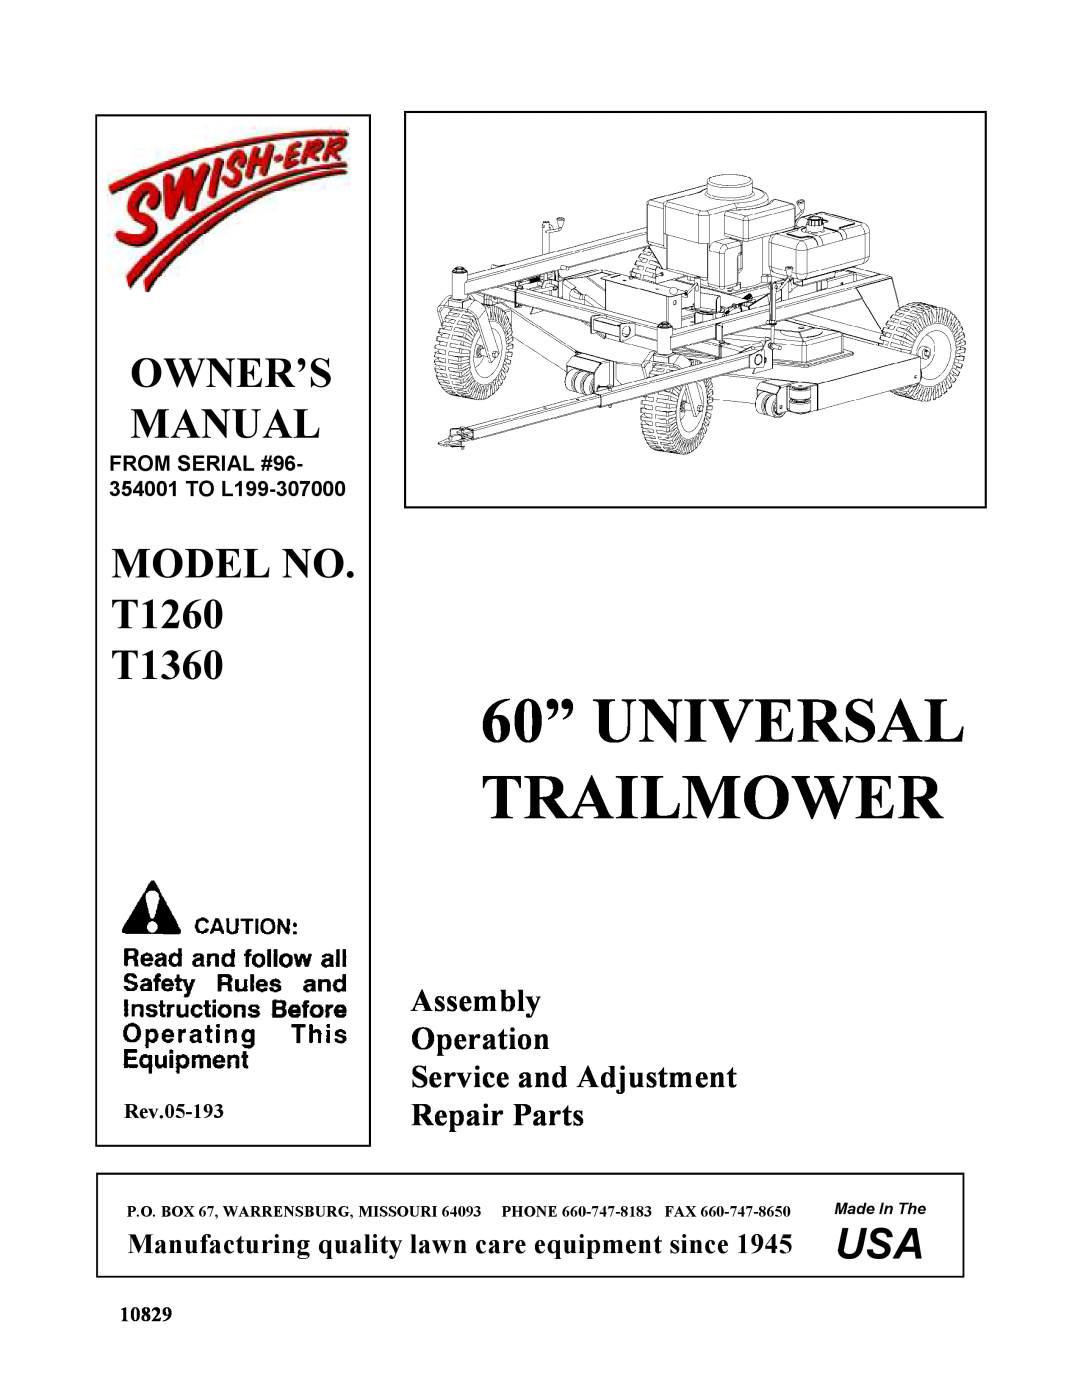 Swisher T1360, T1260 owner manual Owner’S Manual, MODEL NO. T1260 T1360, Manufacturing quality lawn care equipment since 